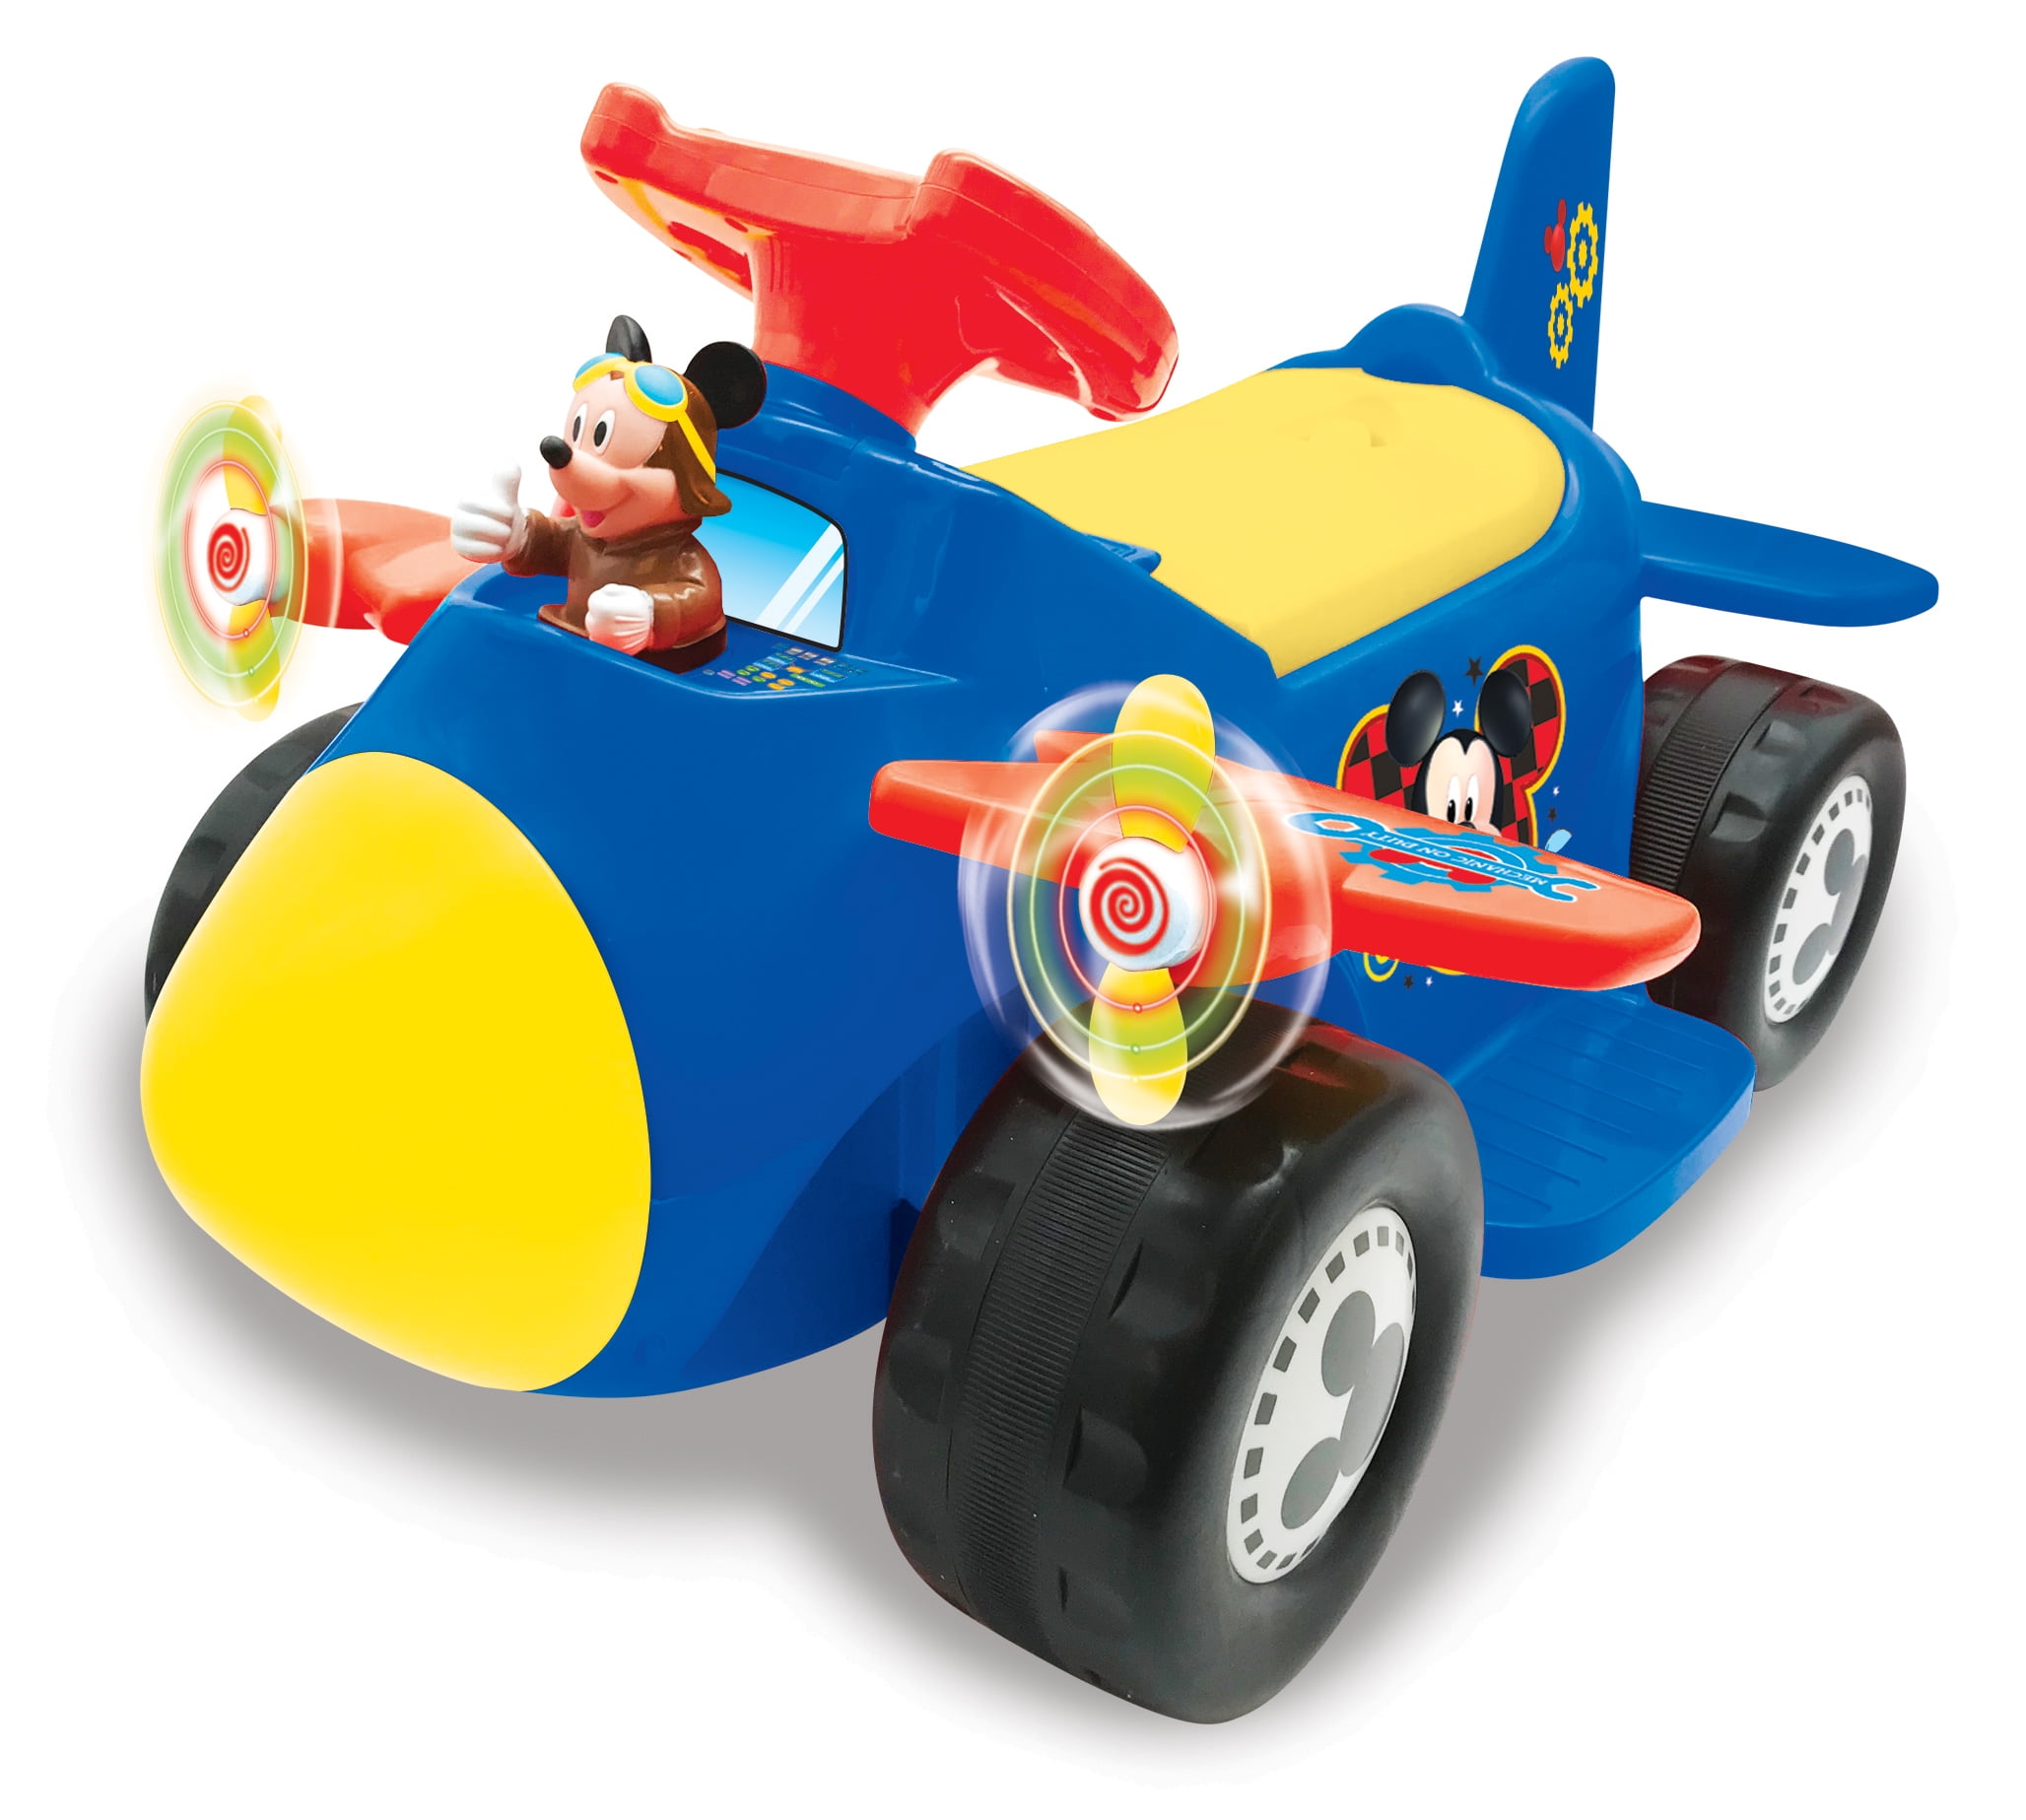 24 volt battery ride on toys